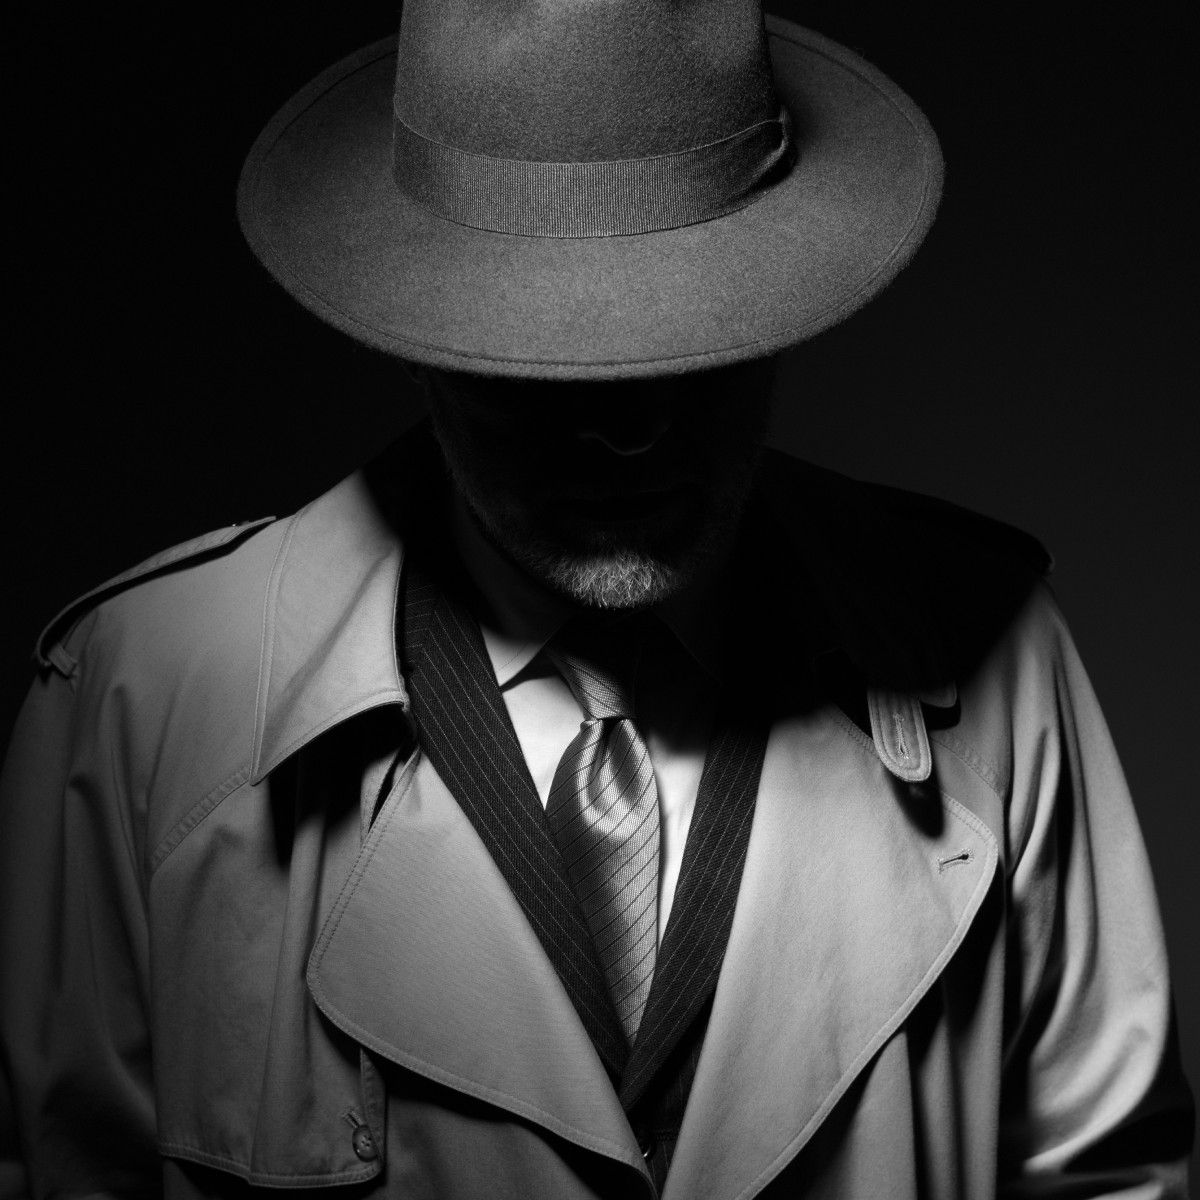 A black and white, moody photo of a man dressed like an old school private investigator with a hat and trench coat.